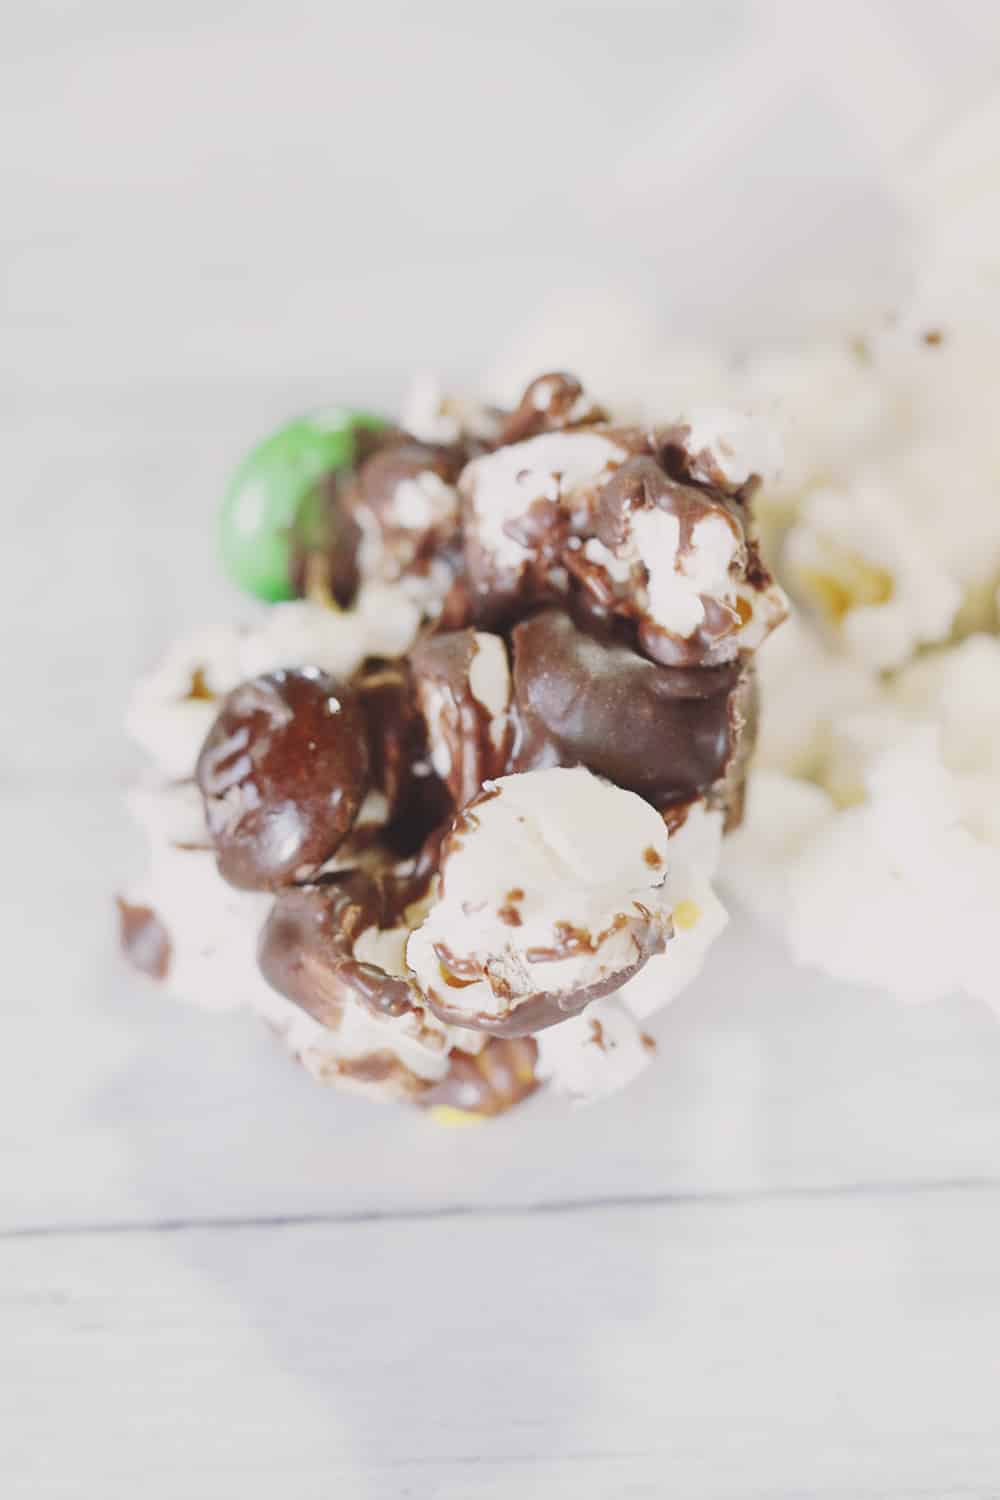 These popcorn and candy movie night bites are a fun, indulgent way to enjoy movie night at home! They're the perfect combination of salty and sweet, too!